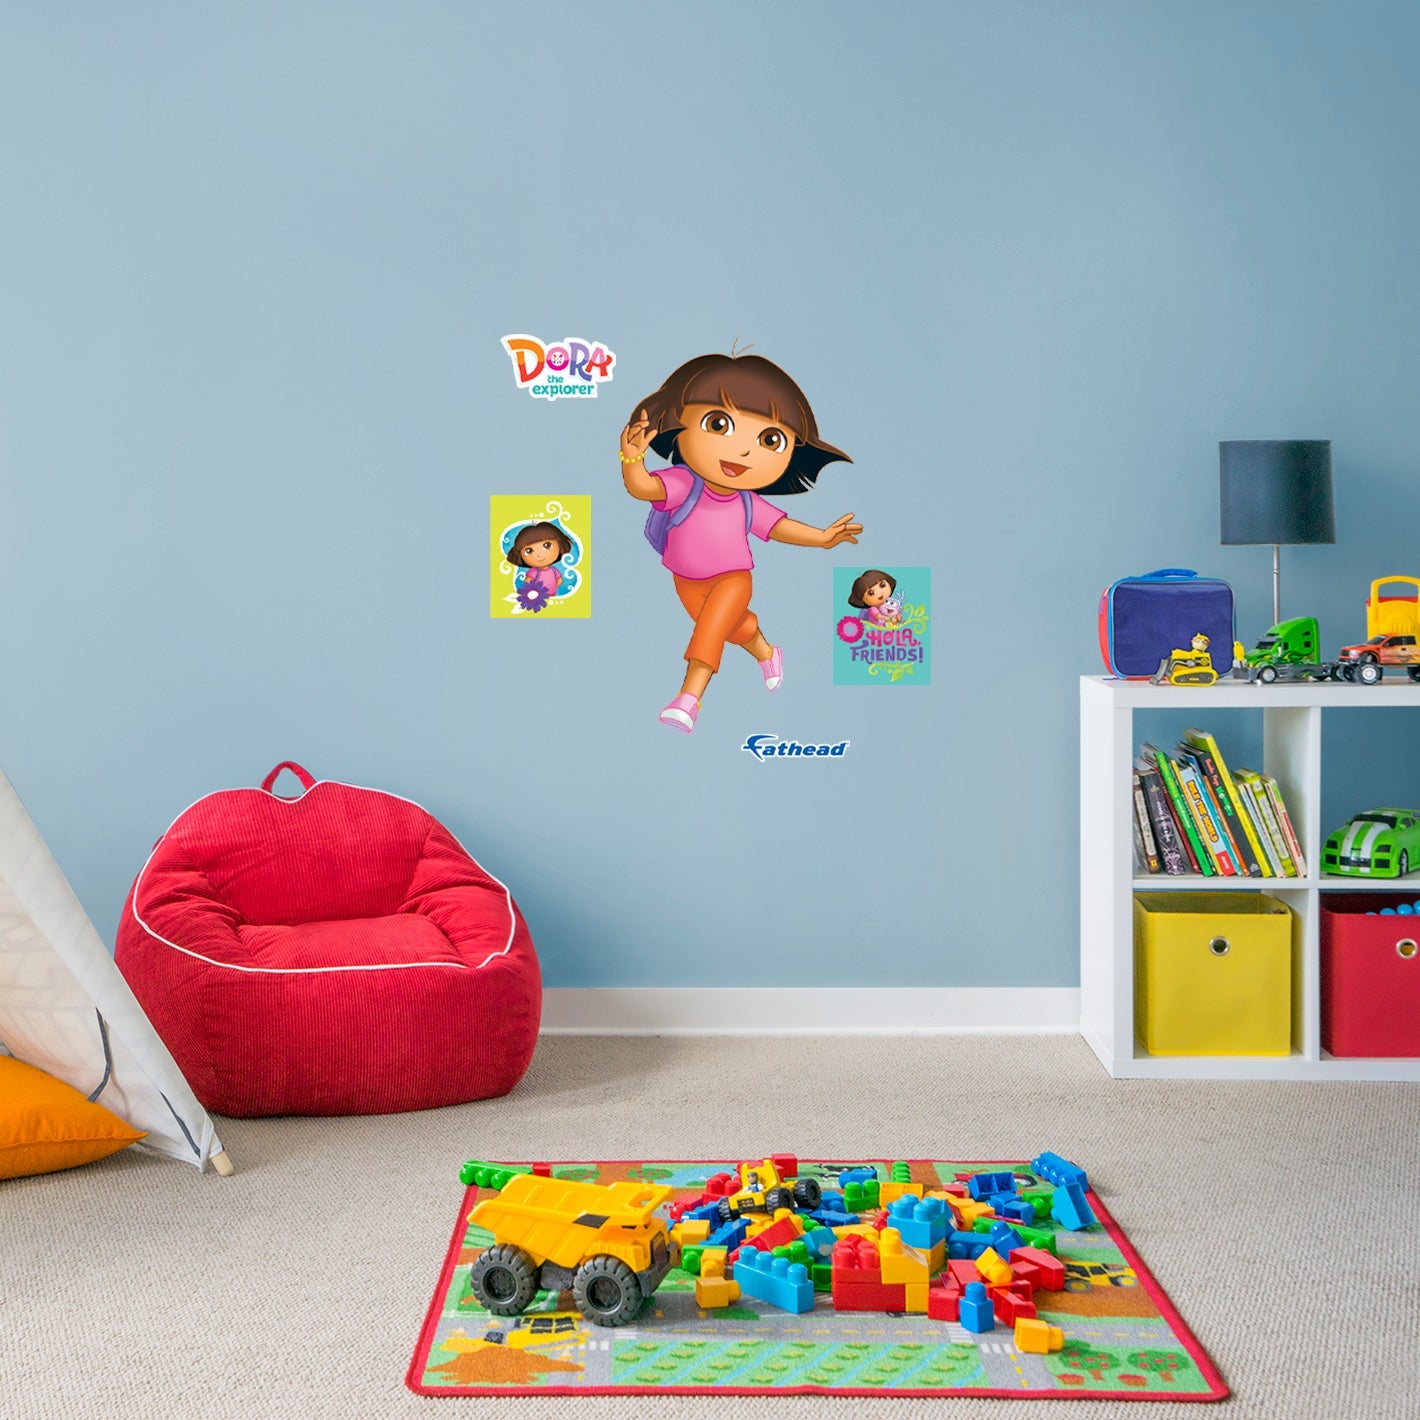 Dora the Explorer: Dora running RealBig - Officially Licensed Nickelodeon Removable Adhesive Decal